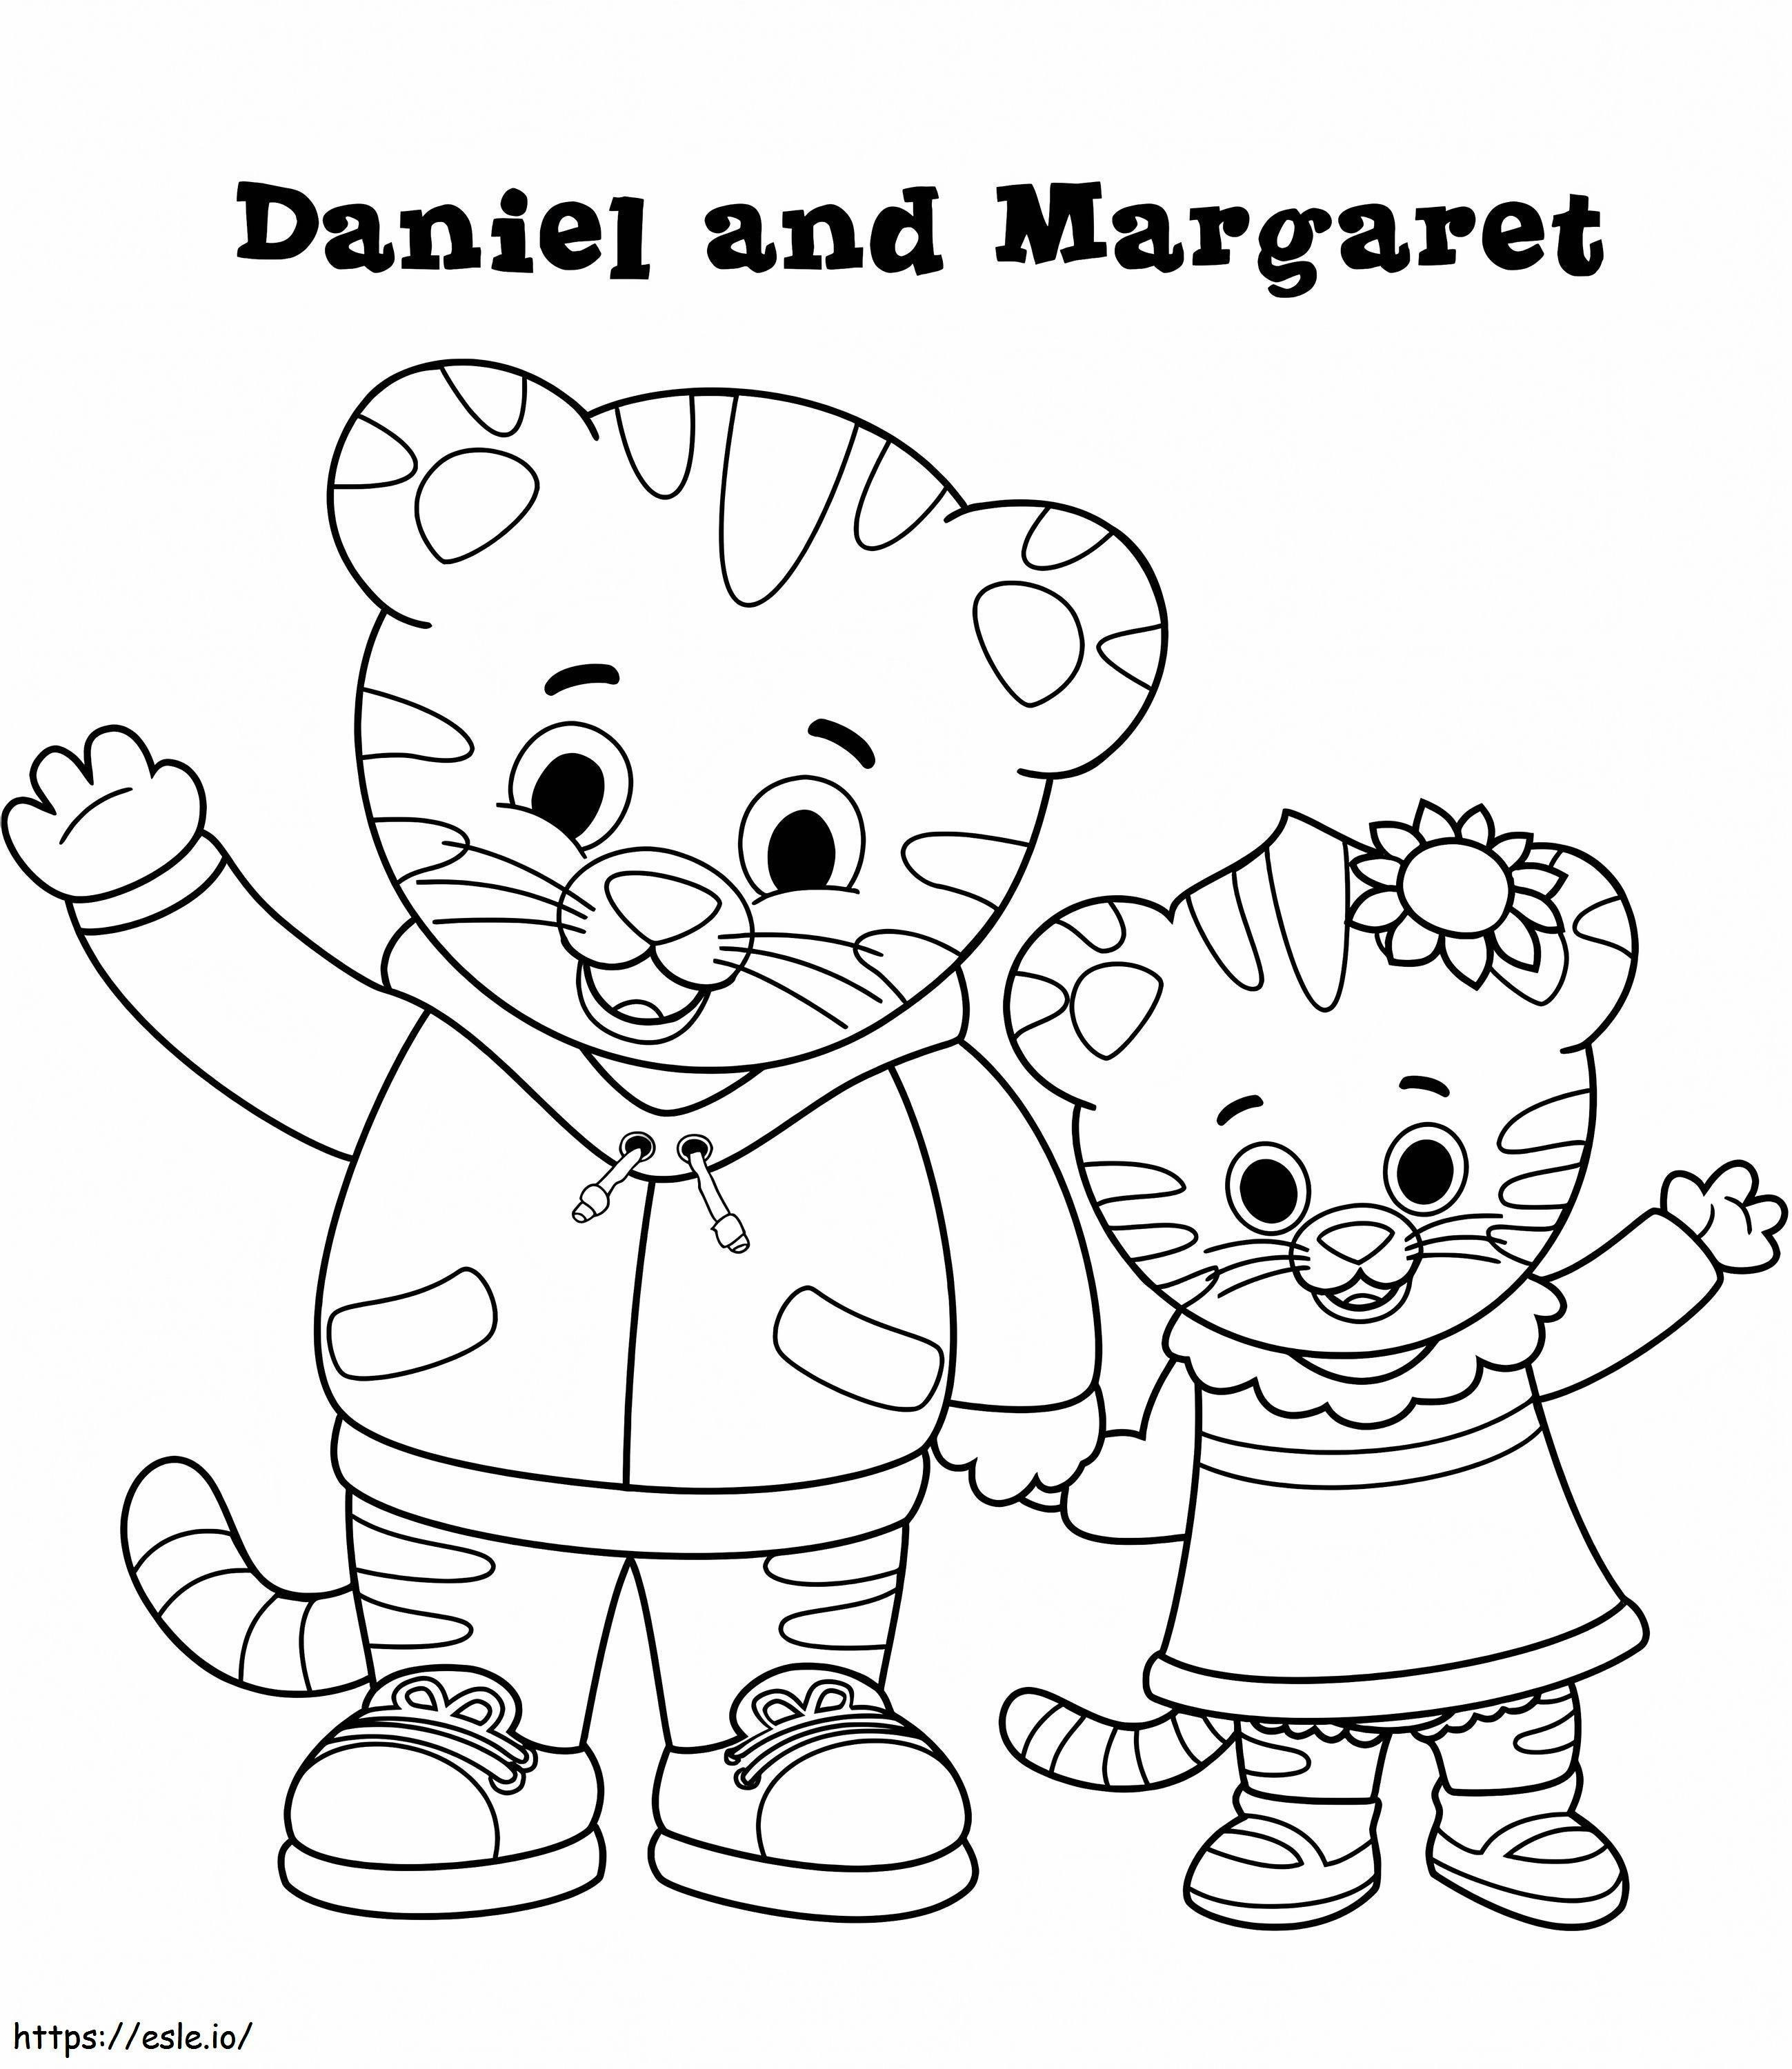 1570372030 Daniel And Margaret A4 coloring page